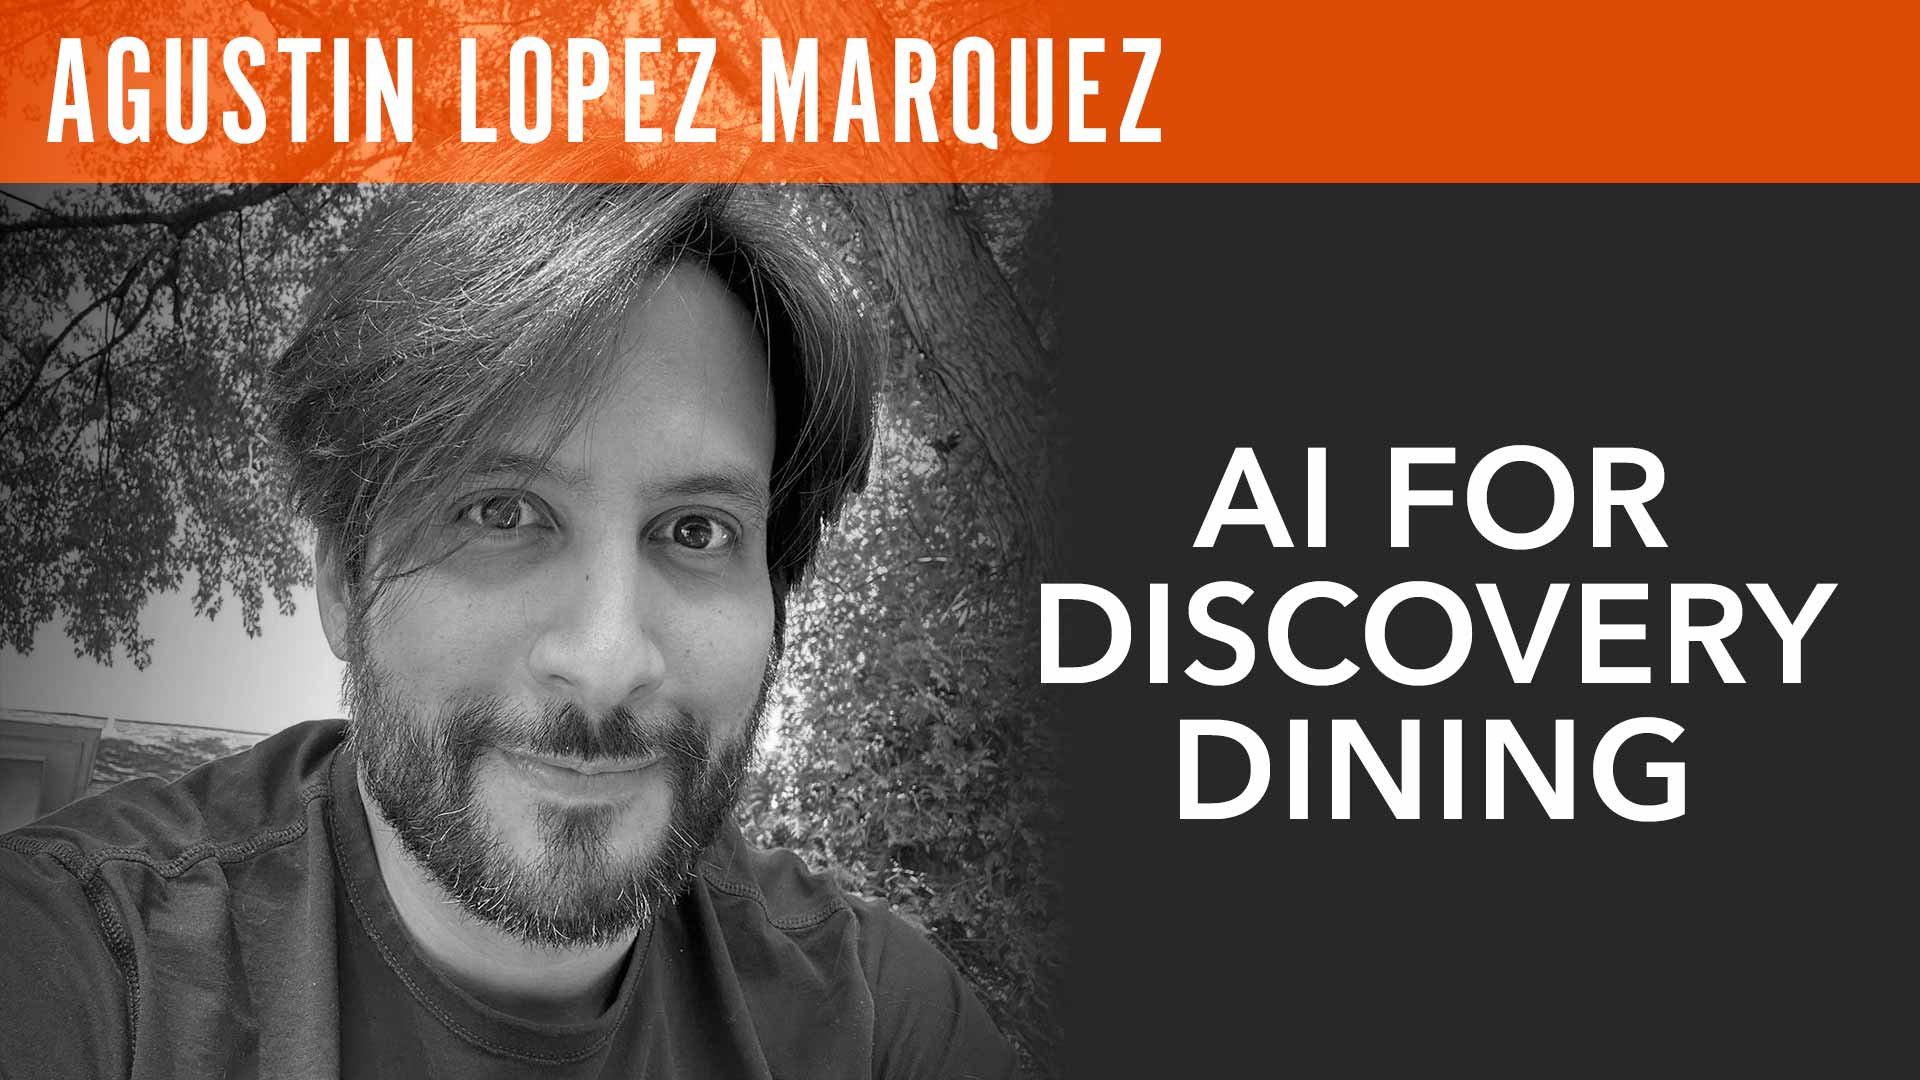 Agustin Lopez Marquez, "AI for Discovery Dining"